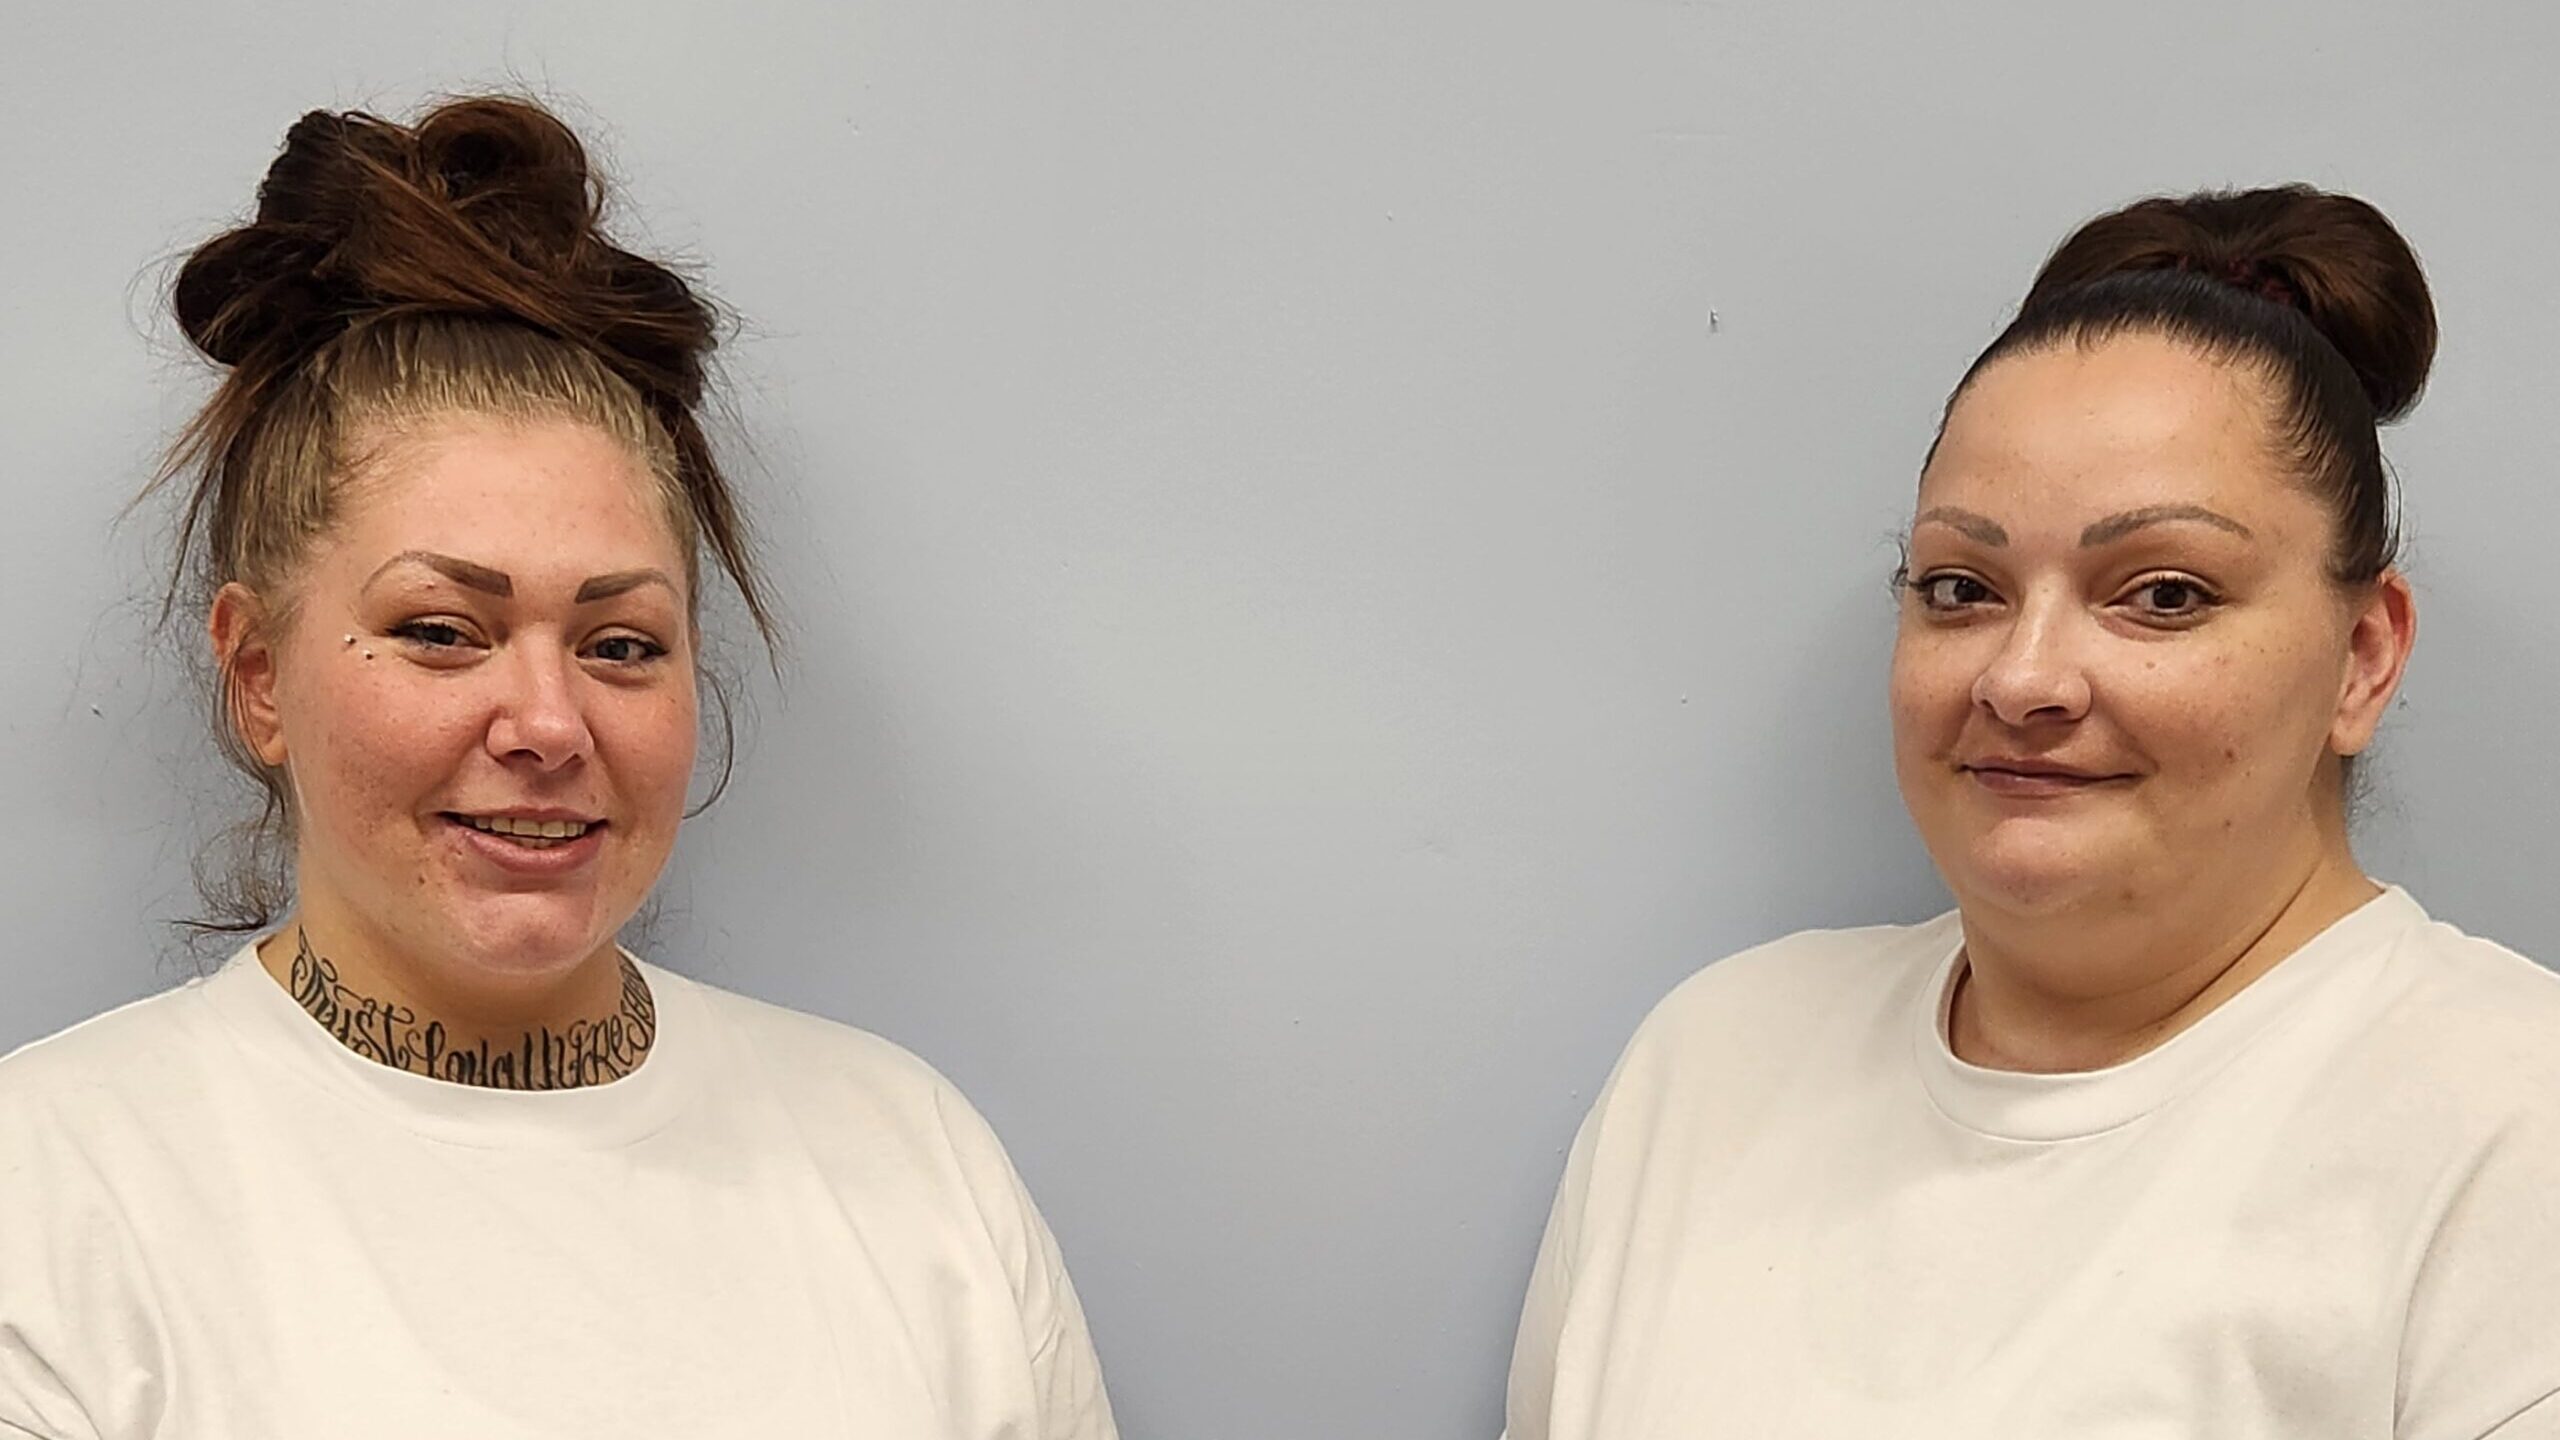 Danielle Lundberg and Amanda Magaña are pictured, they are both moms in a utah prison...